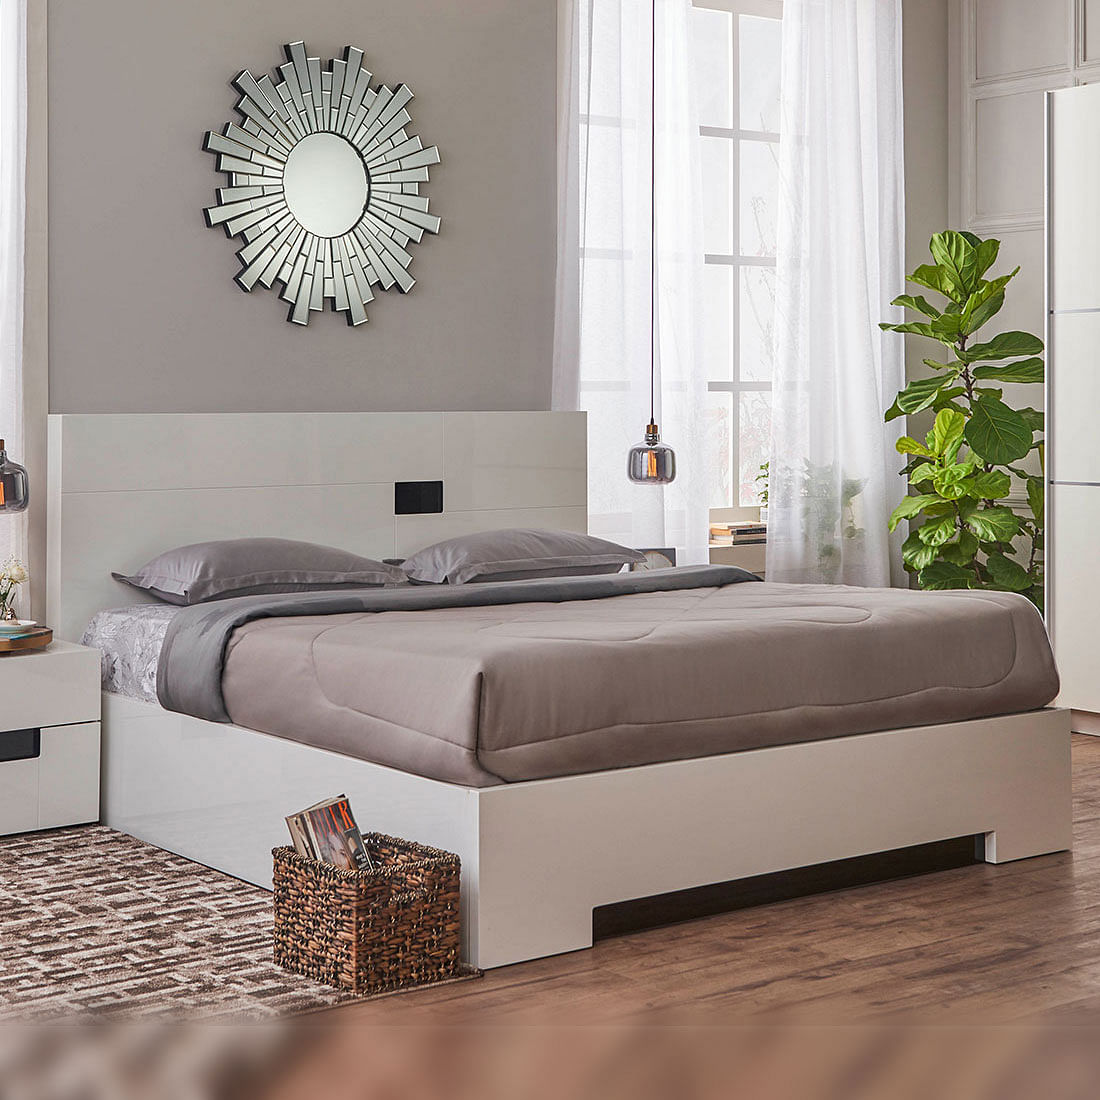 Buy Edwina High Gloss King bed with Hydraulic storage in White ...